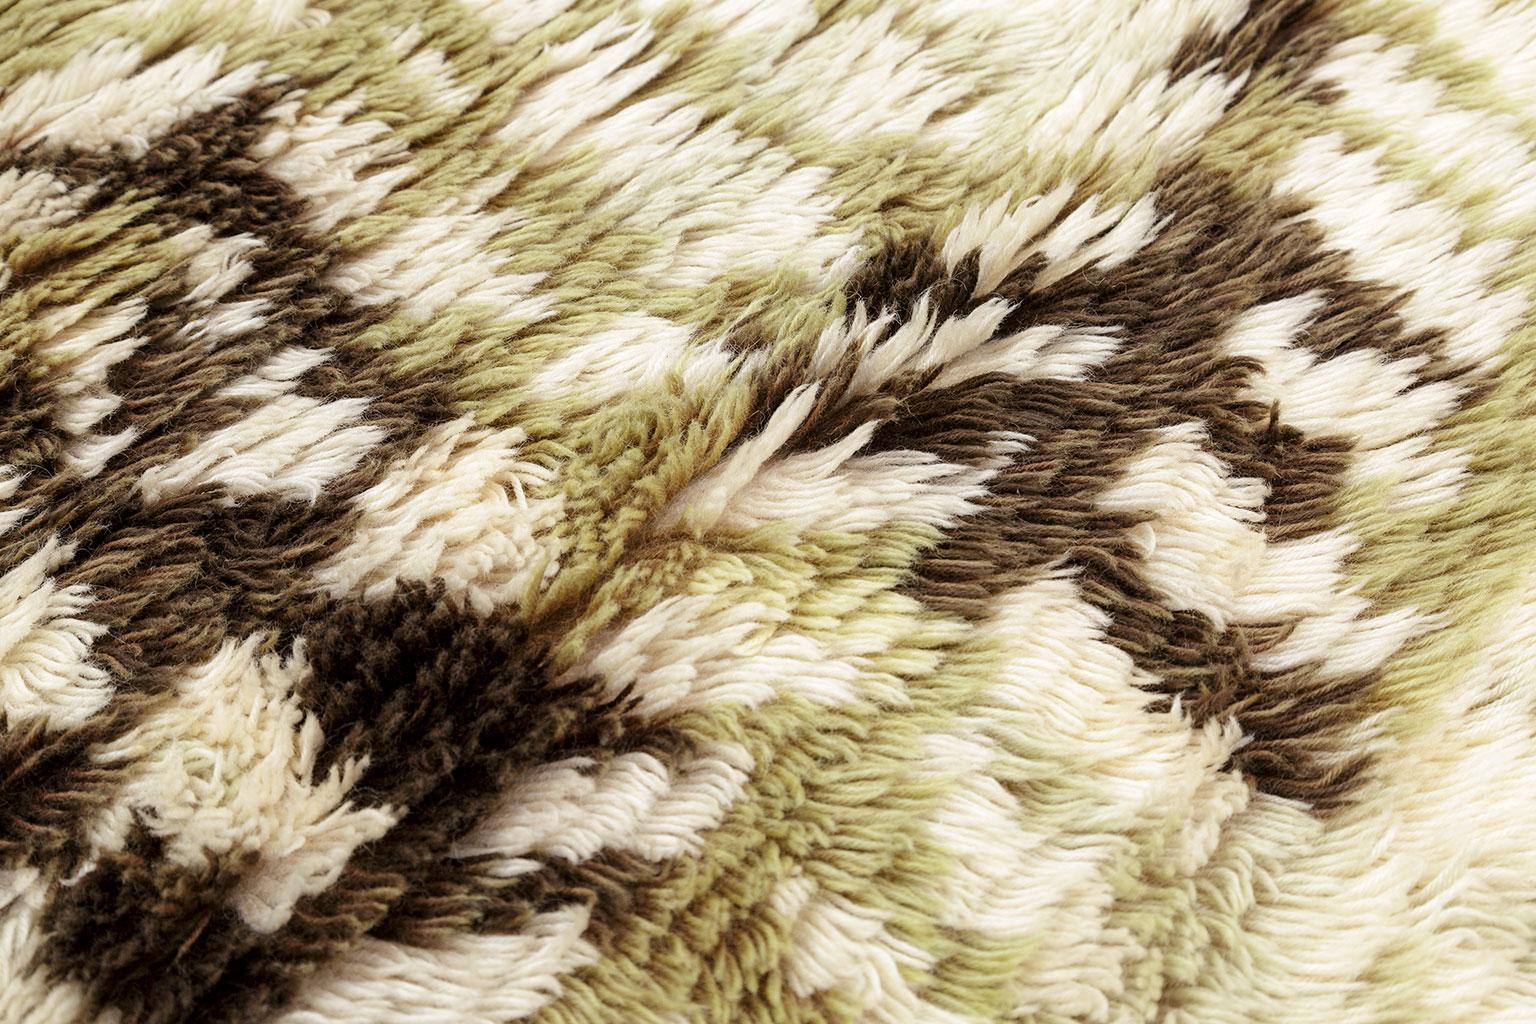 Sananjalkametsä / Forest of Ferns

Designed in 1955 by Kirsti Ilvessalo (1920-2019). Ilvessalo was one of the most prominent textile designers concentrating especially on the ryijy or rya rugs. She designed over 300 different ryas during her